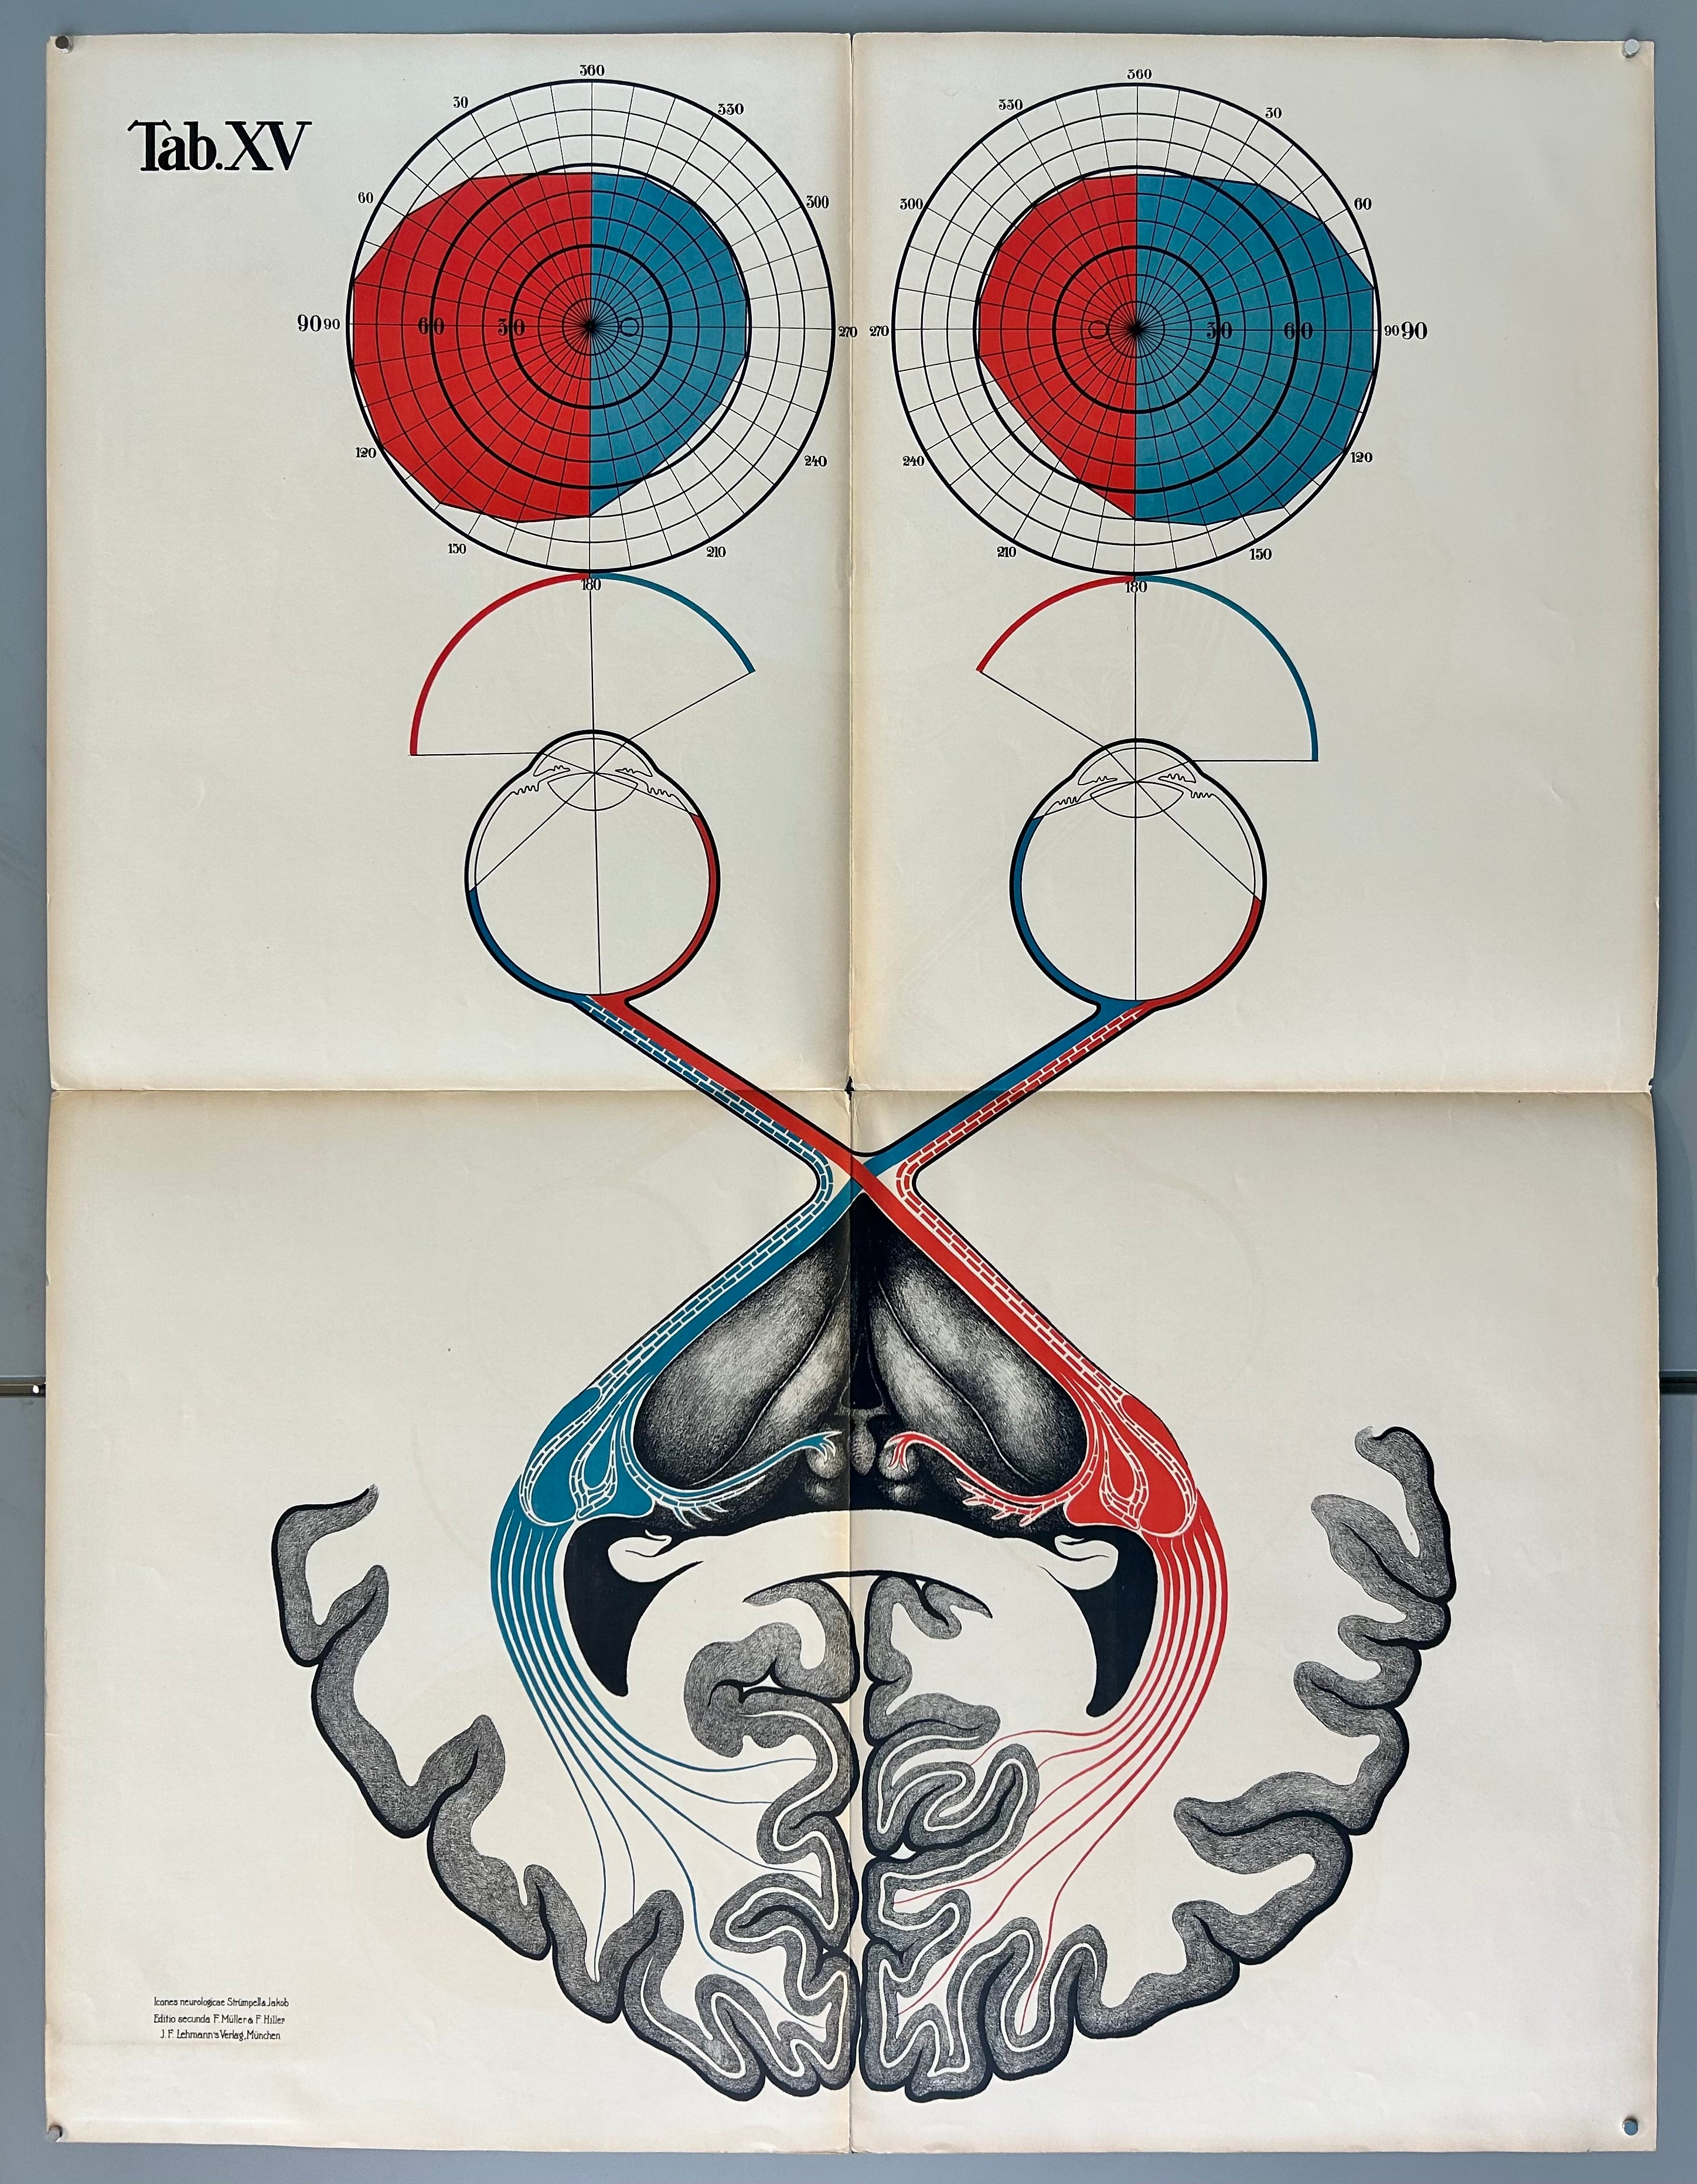 Drawing showing the inner workings of the brain, in connection to eyeballs. The field of vision is depicted in red and blue, and is shown with a large spiral diagram. 